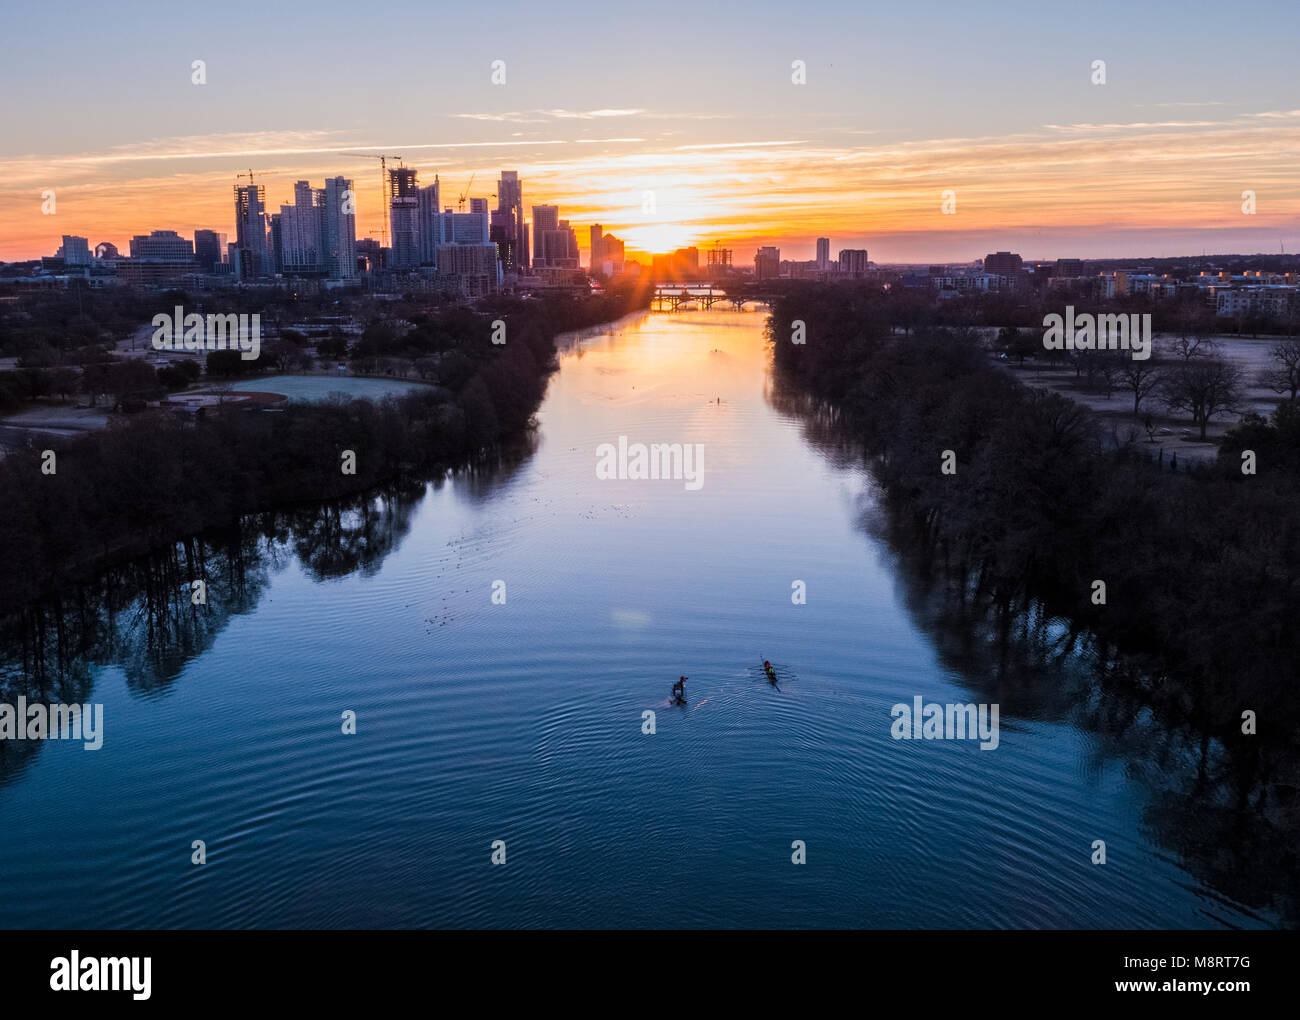 High angle distant view of people sculling on Lady Bird Lake against cityscape during sunrise Stock Photo